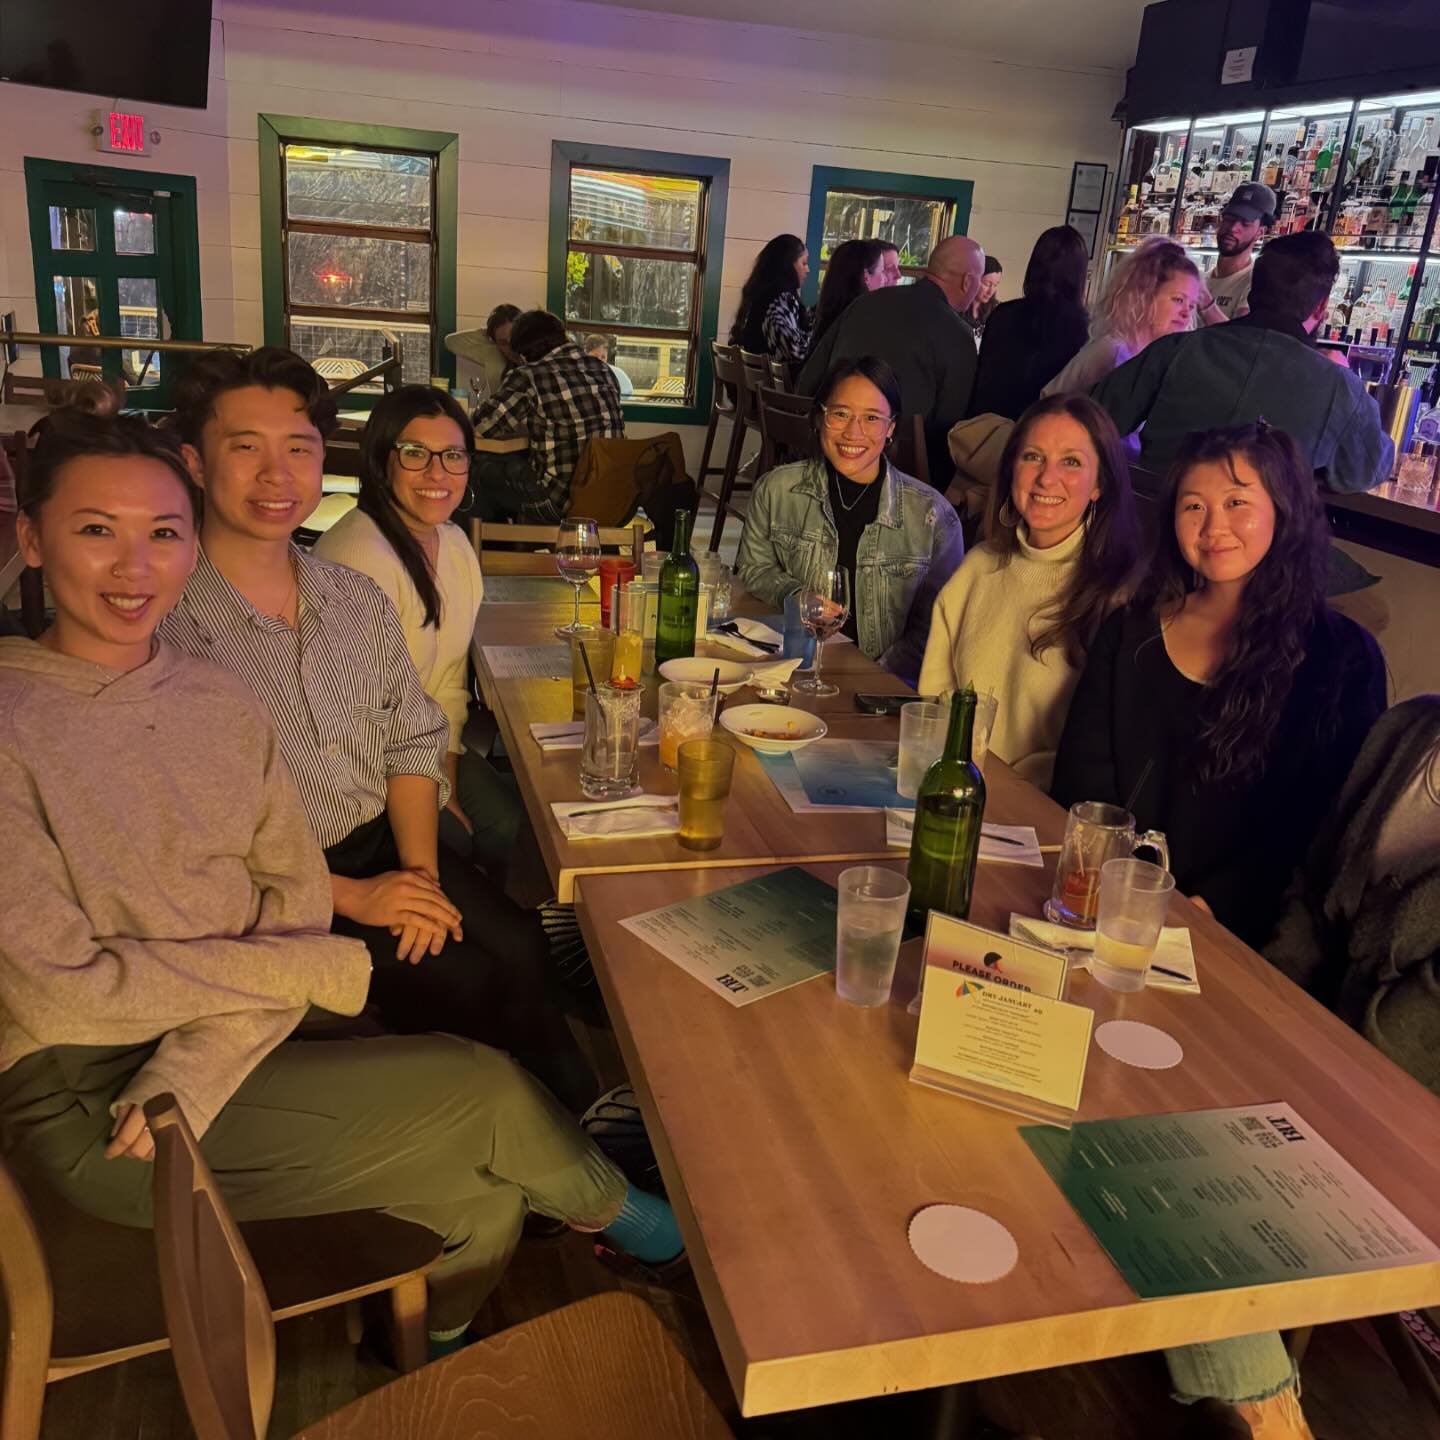 Earlier this year, our team took off for our 2nd annual strategic offsite, this time in Houston, TX! Not only is it our co-founder Jen&rsquo;s hometown, Houston encompasses rich diversity and a unique urban model, offering us a fresh perspective outs